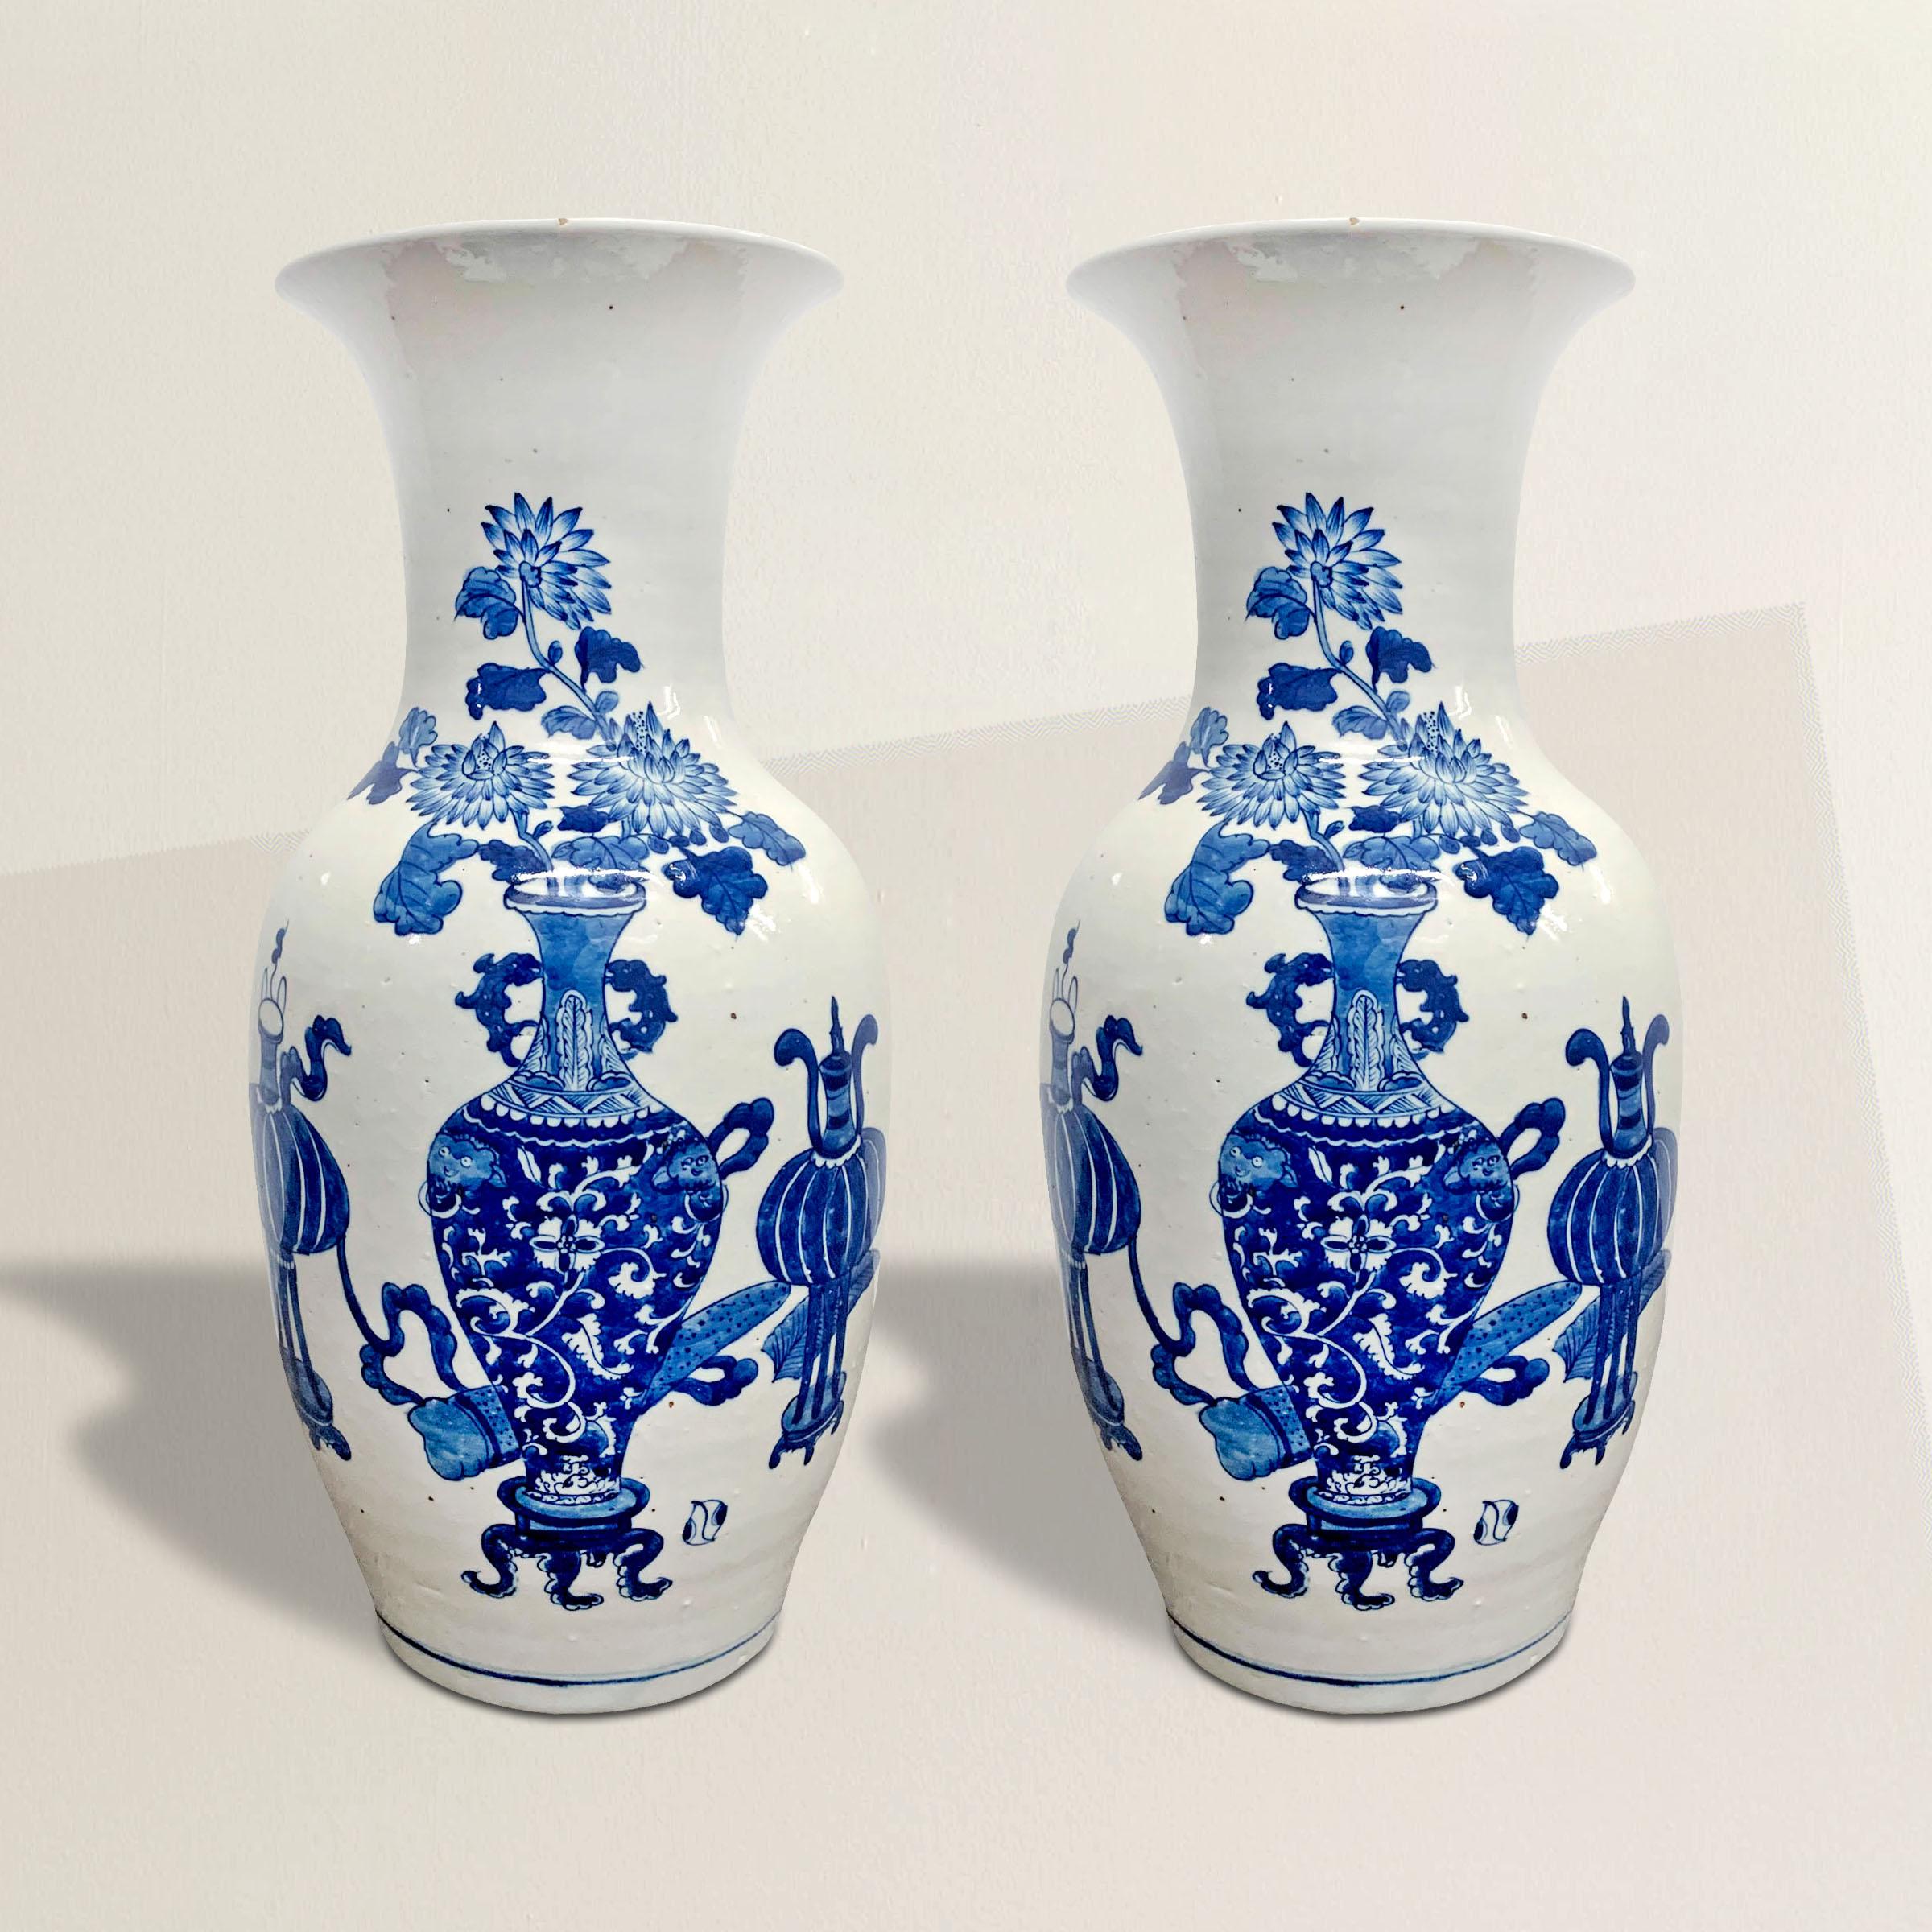 A pair of 19th century Chinese blue and white vases each hand-painted with various scholar's objects including vases filled with chrysanthemums, and flanked by pairs of incense burners, and scrolls behind the vases.